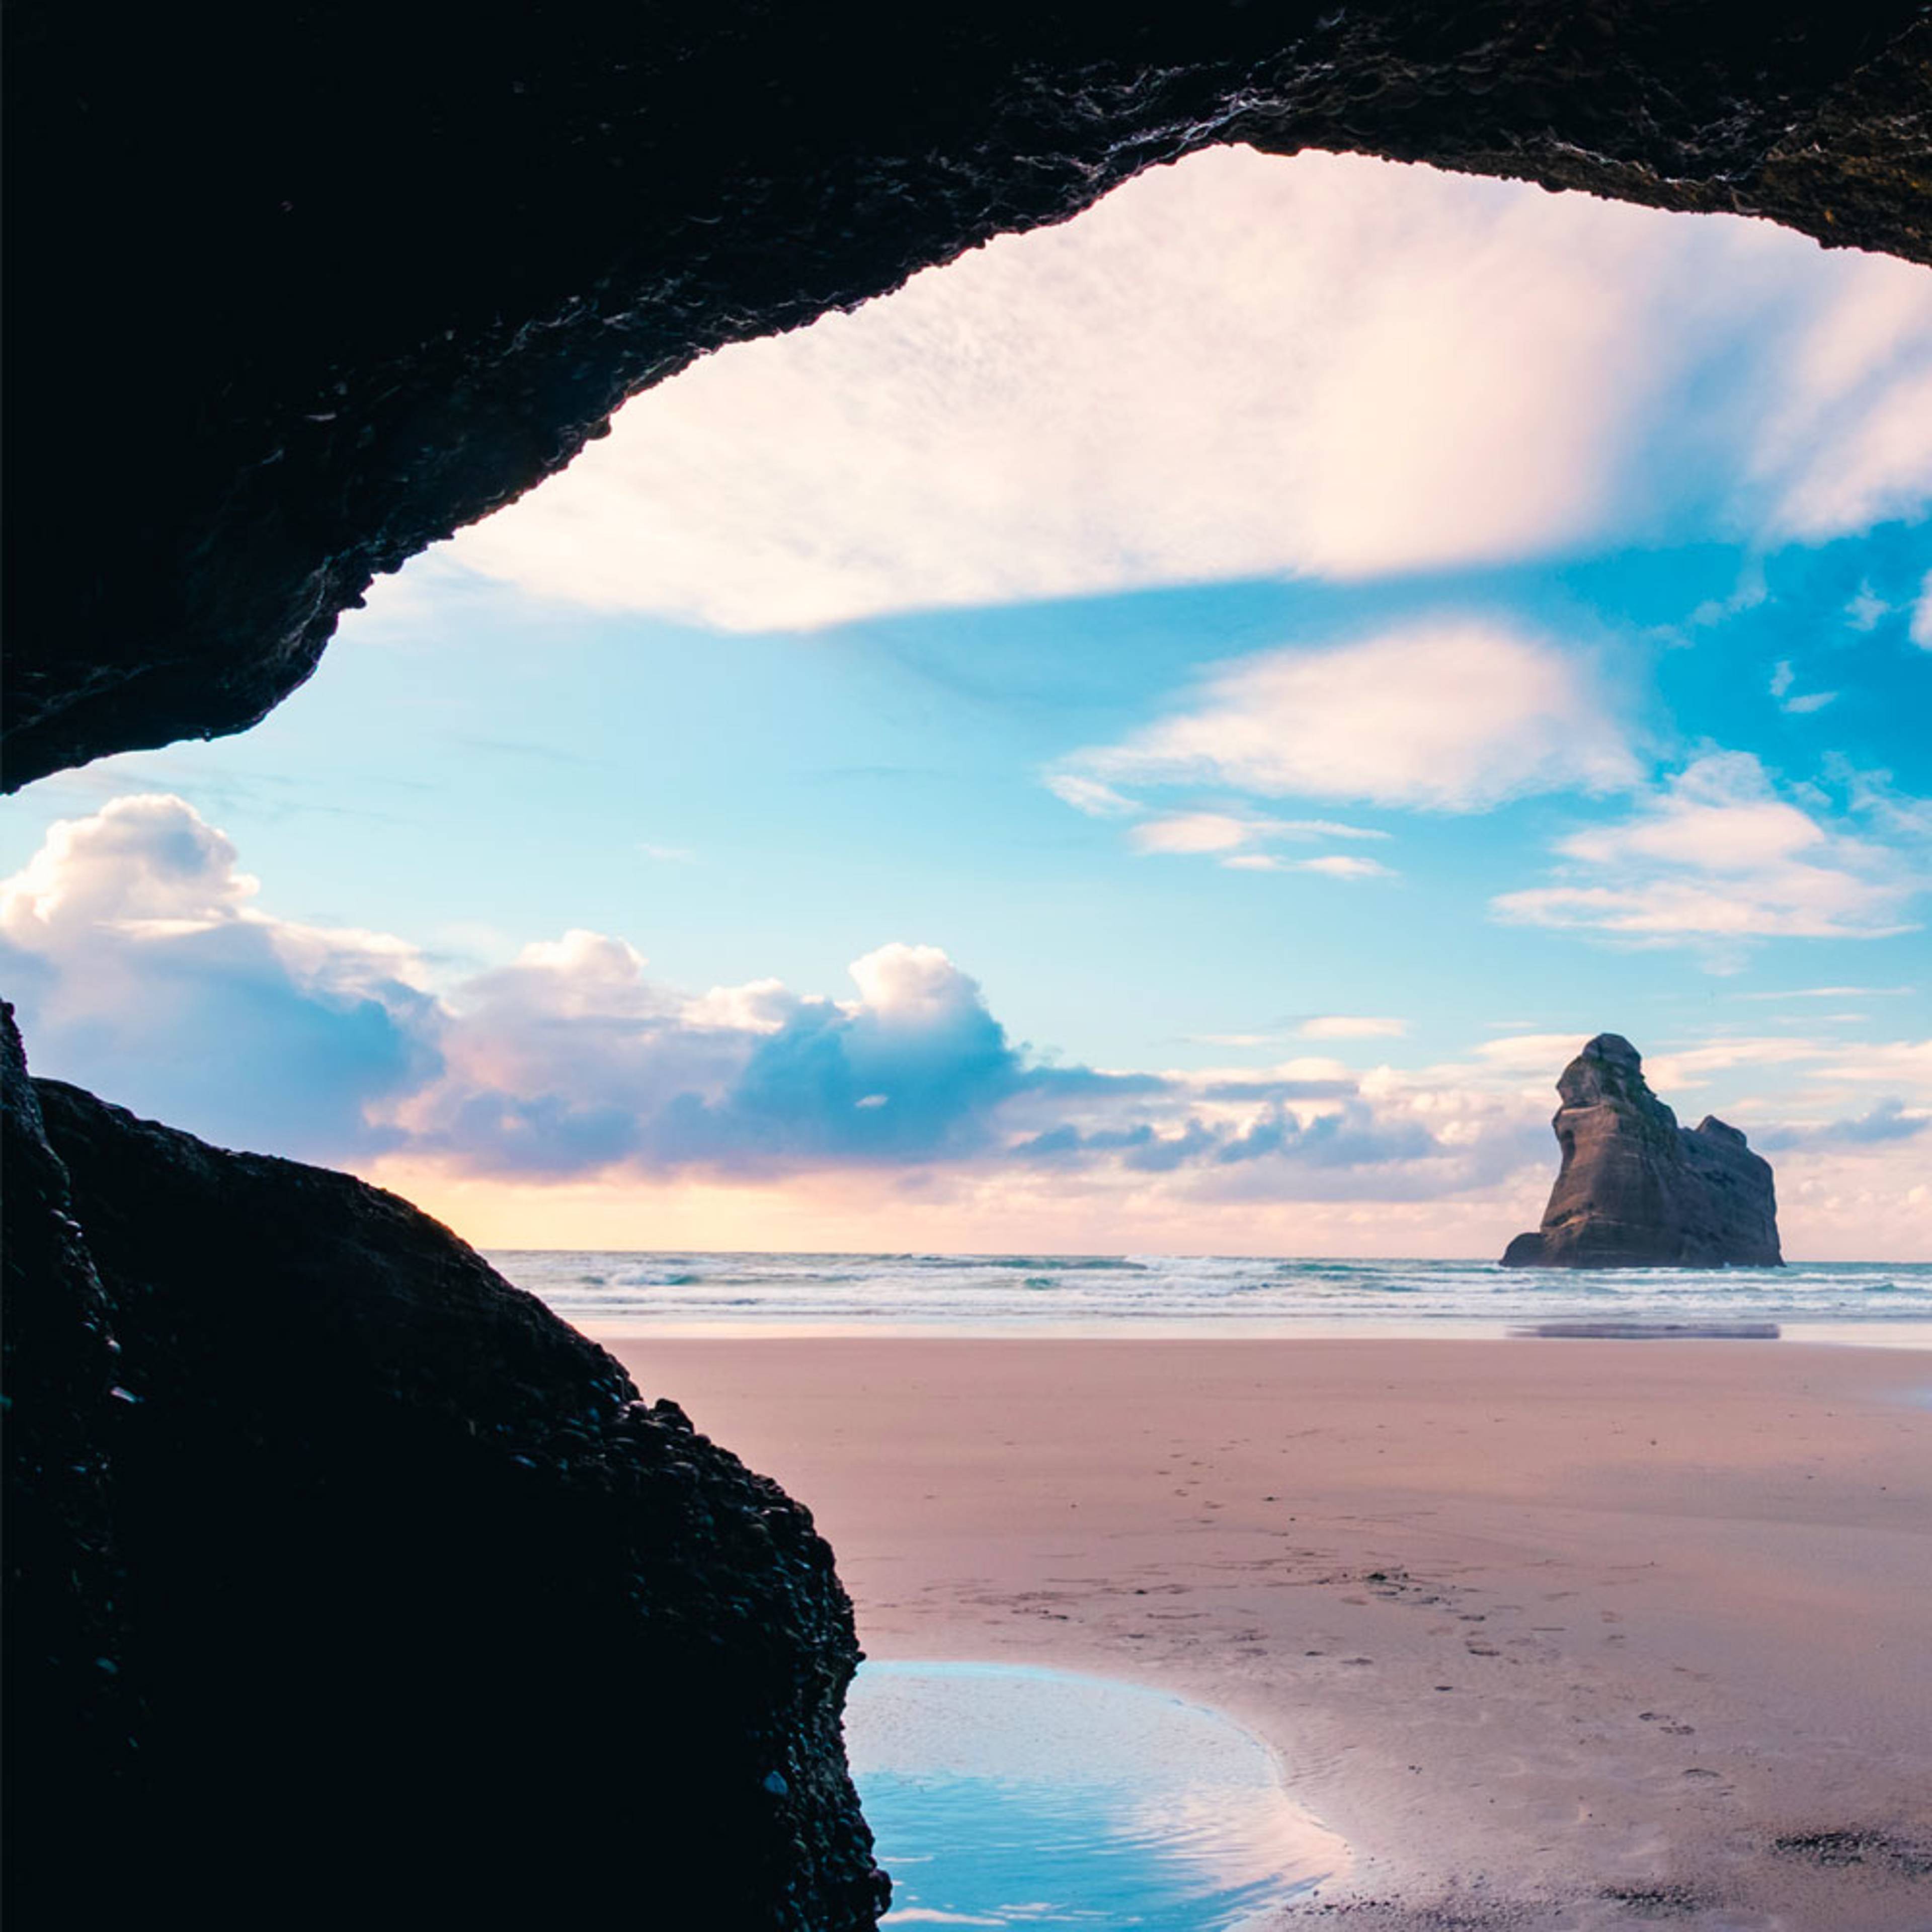 Design your perfect tour of New Zealand's beaches with a local expert